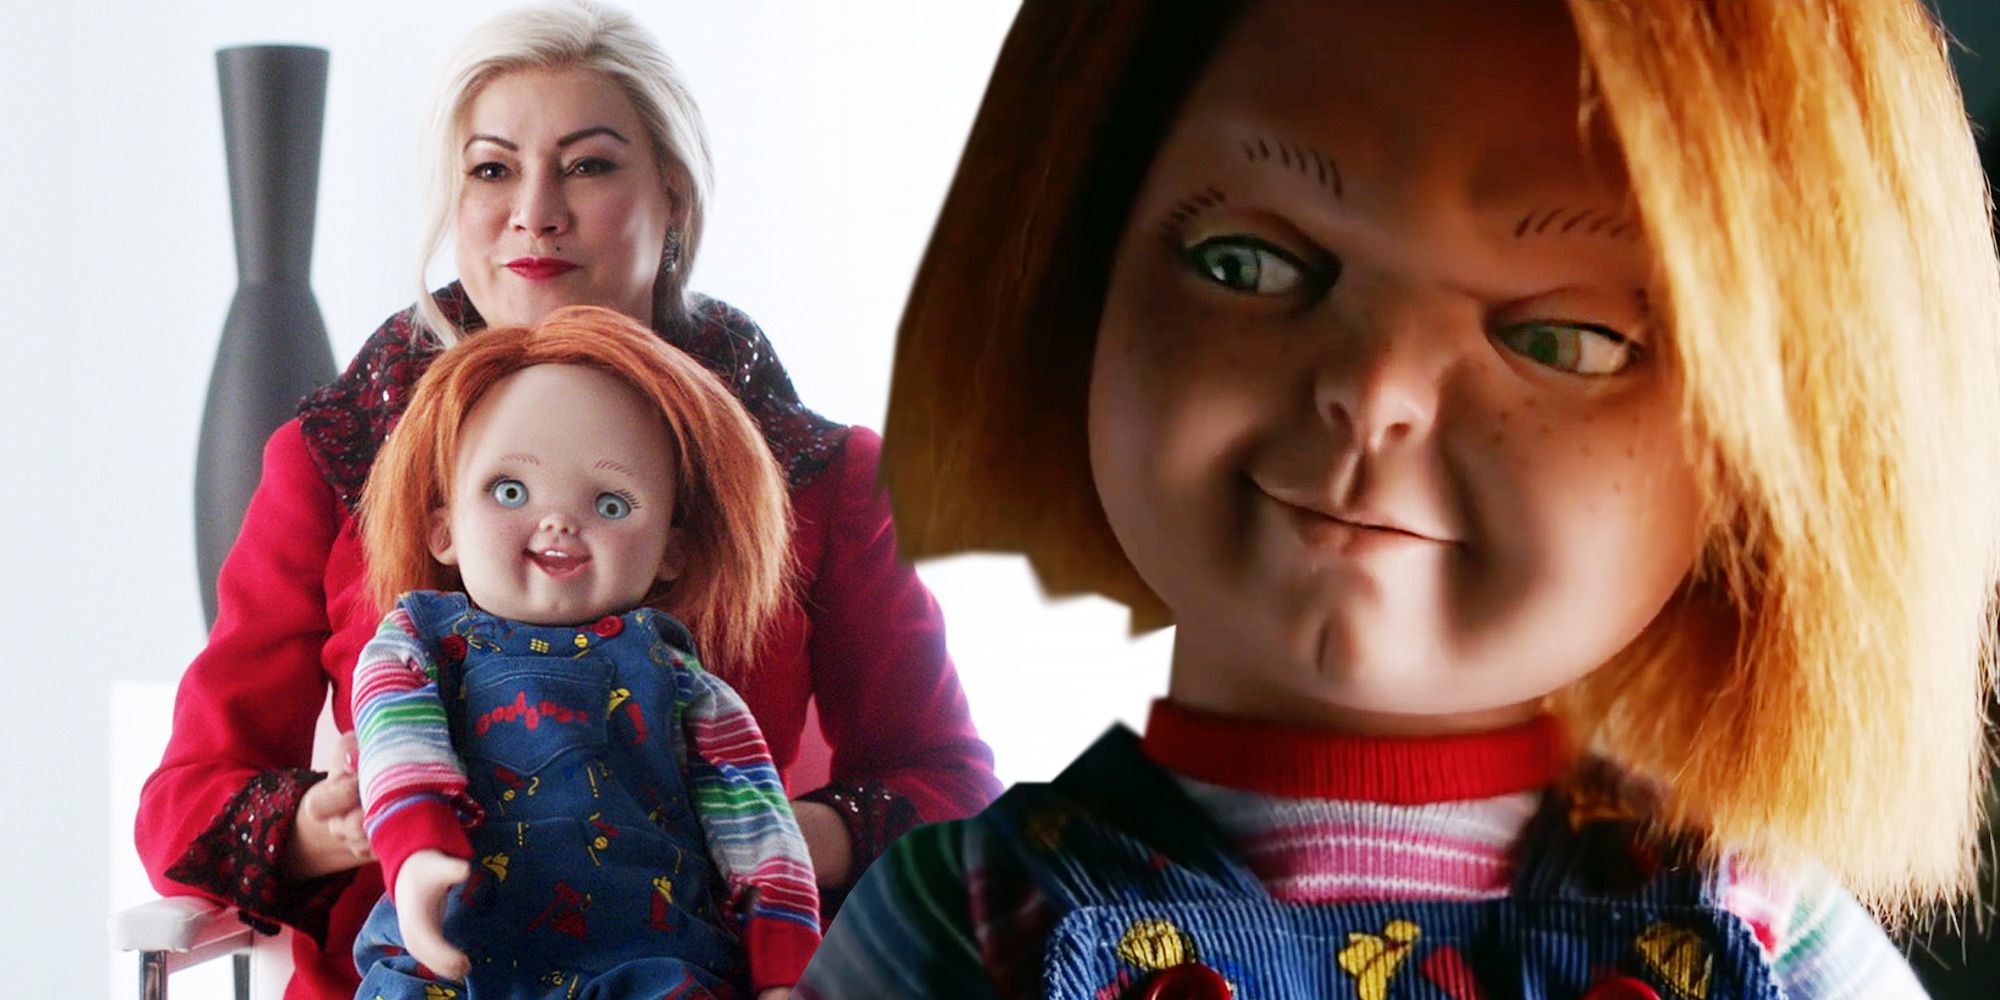 The doll in Chucky